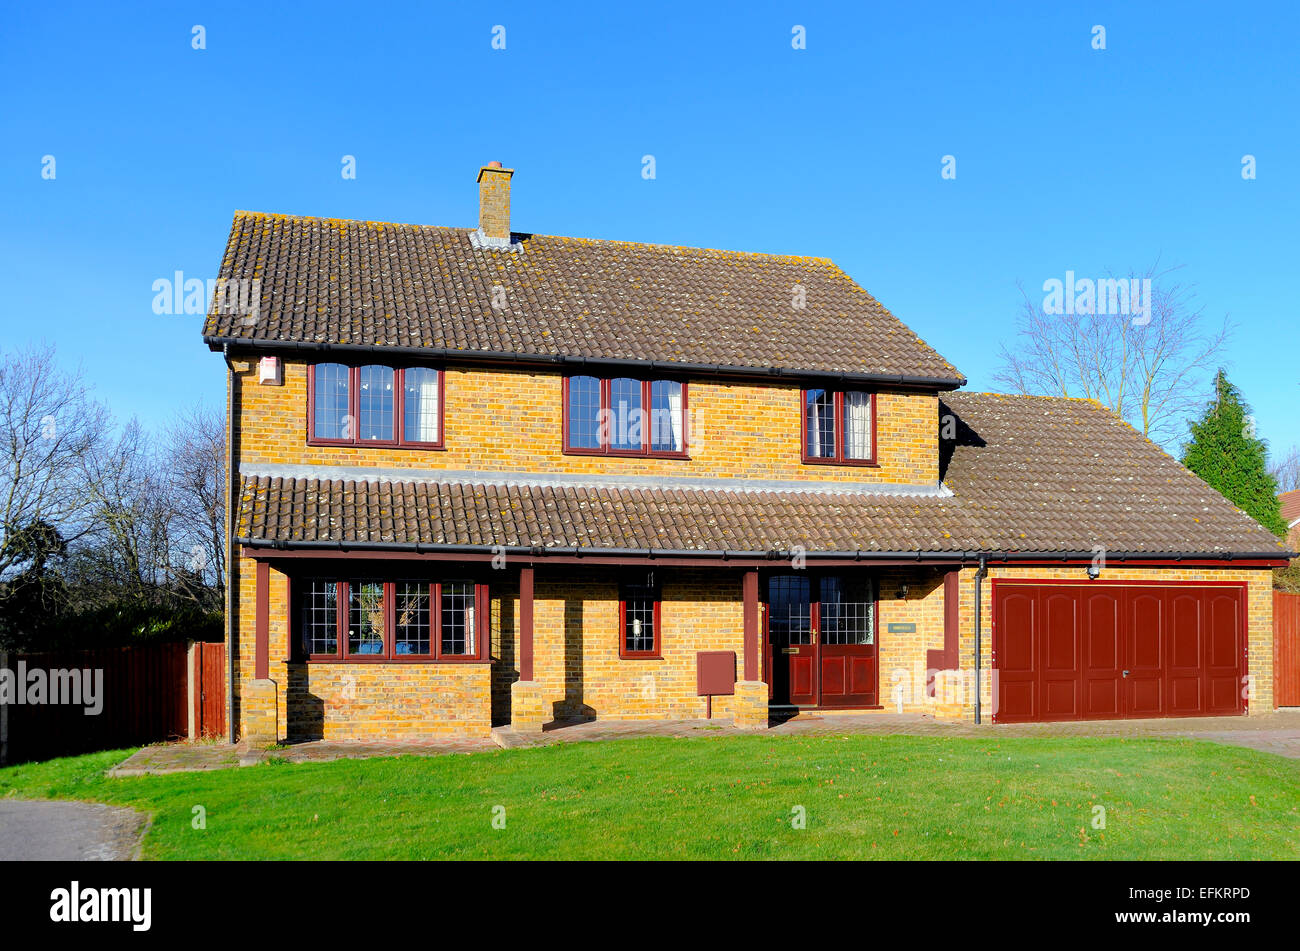 Large 4 5 bedroom executive style detached house exterior garage front lawn & drive against a blue sky Kent England UK Stock Photo